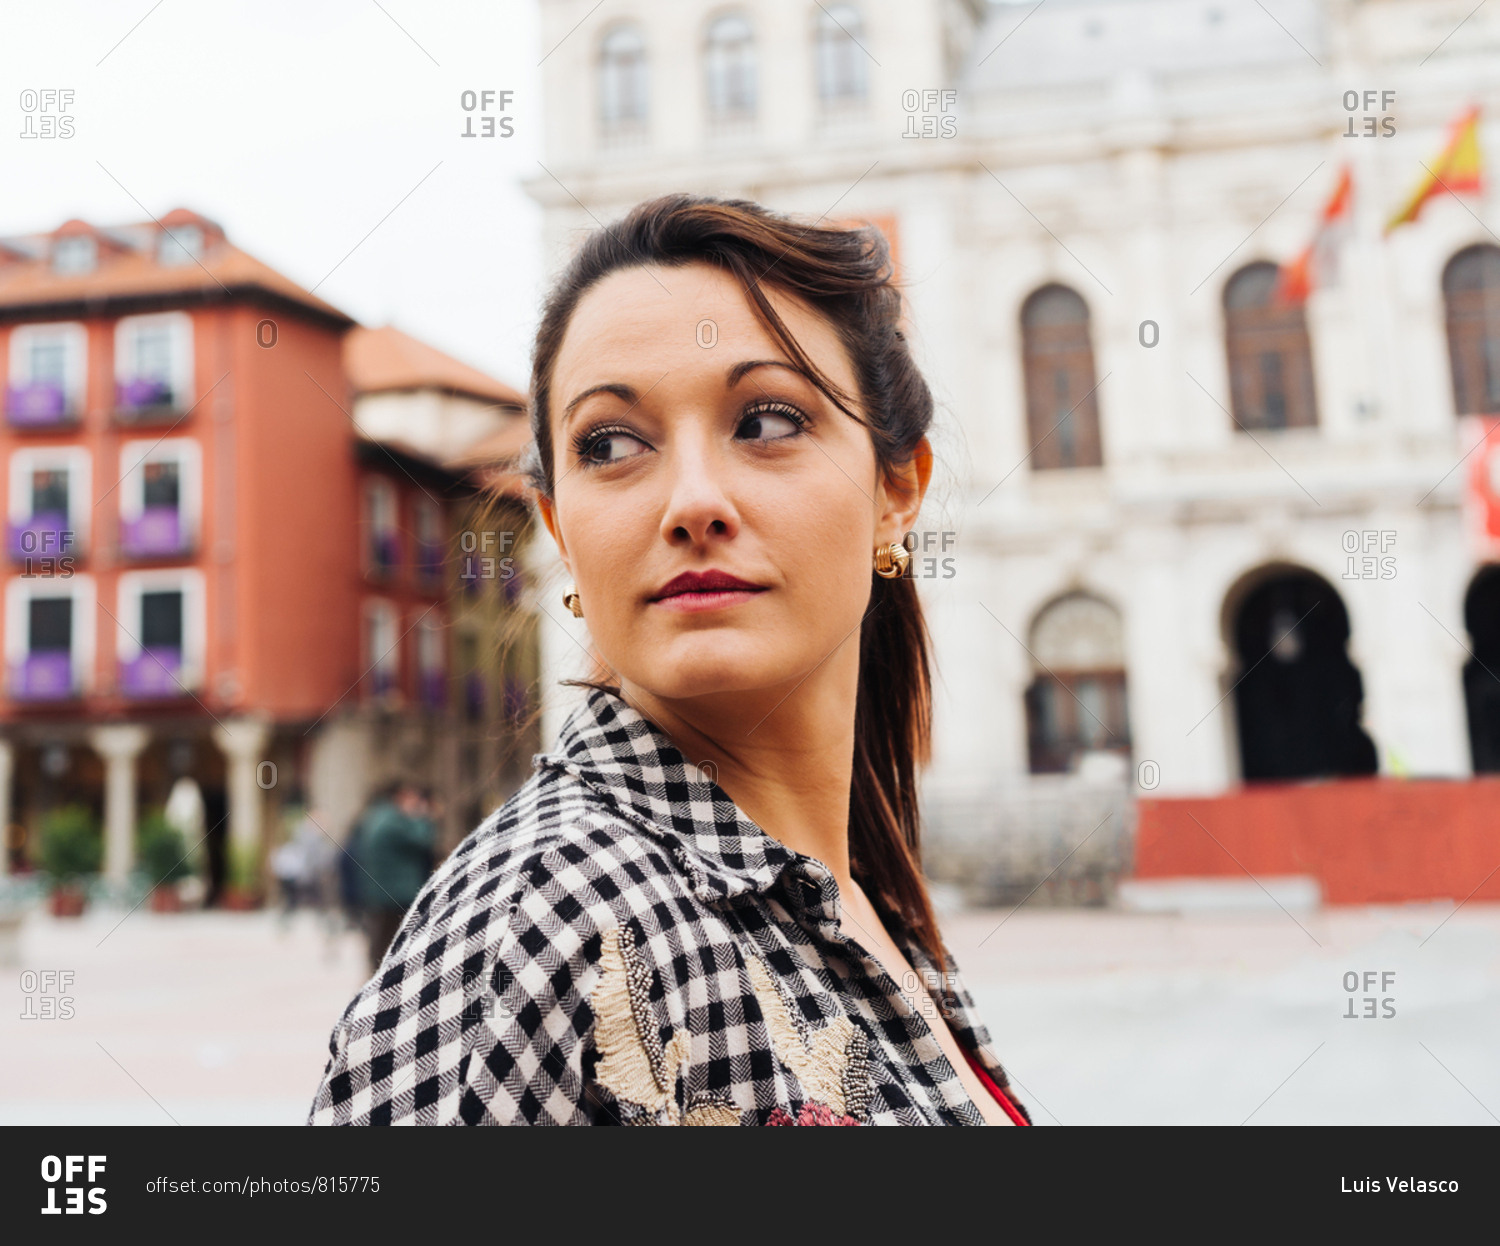 Young Brunette Woman With Red And Plaid Clothes Standing In Front Of Old Buildings In The Main Square Of A Spanish Town.